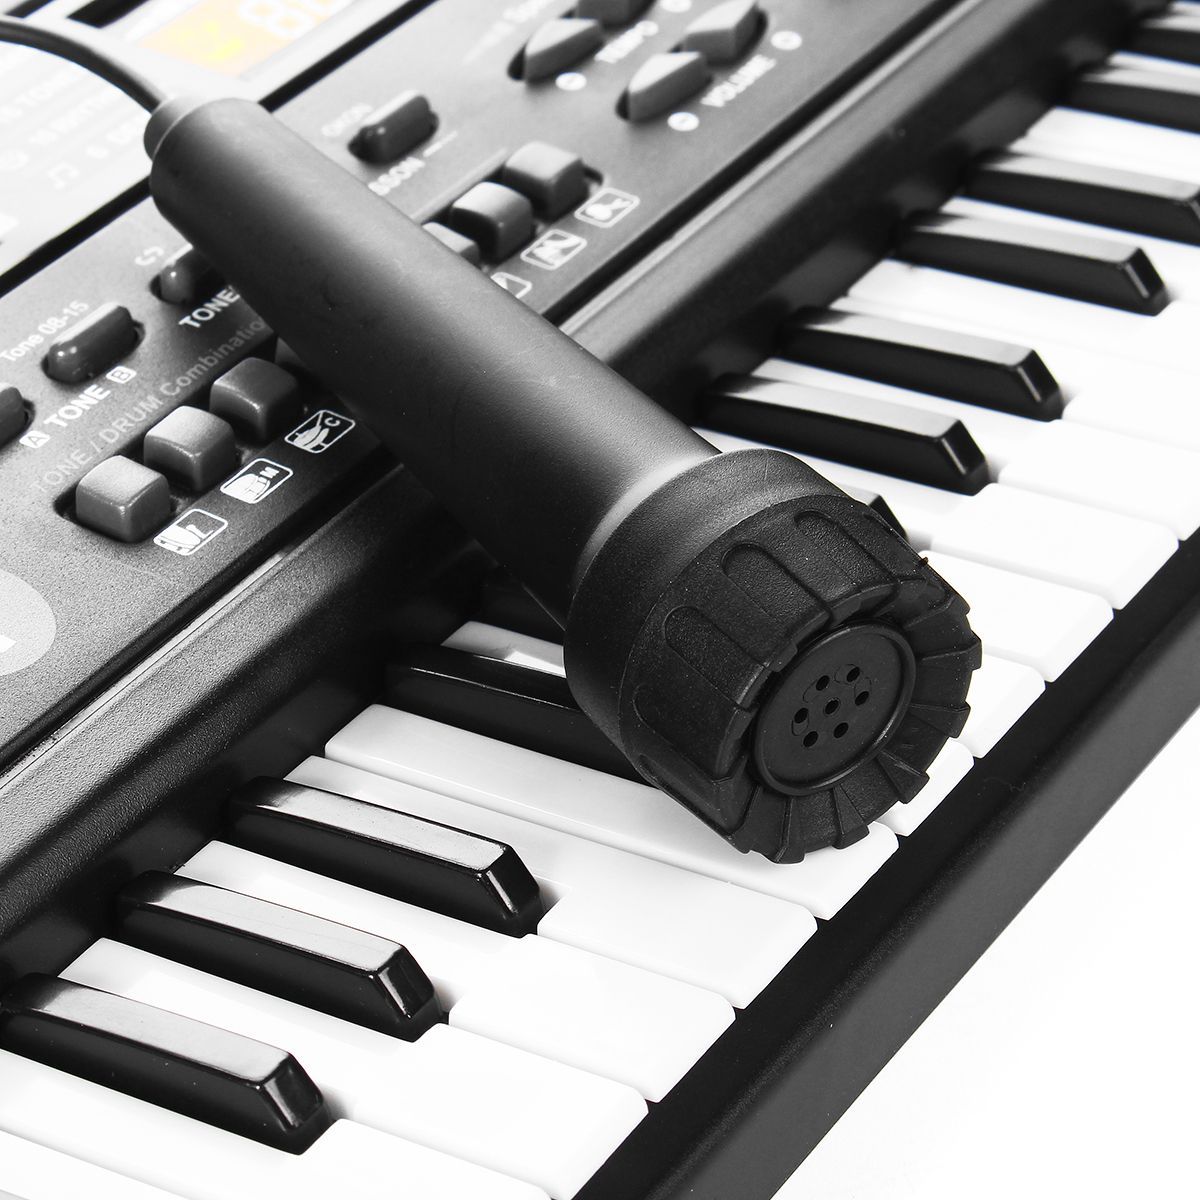 Standard-61-Keys--Children-Electronic-Piano-Keyboard-with-External-Speaker-Microphone-Supports-Singi-1660652